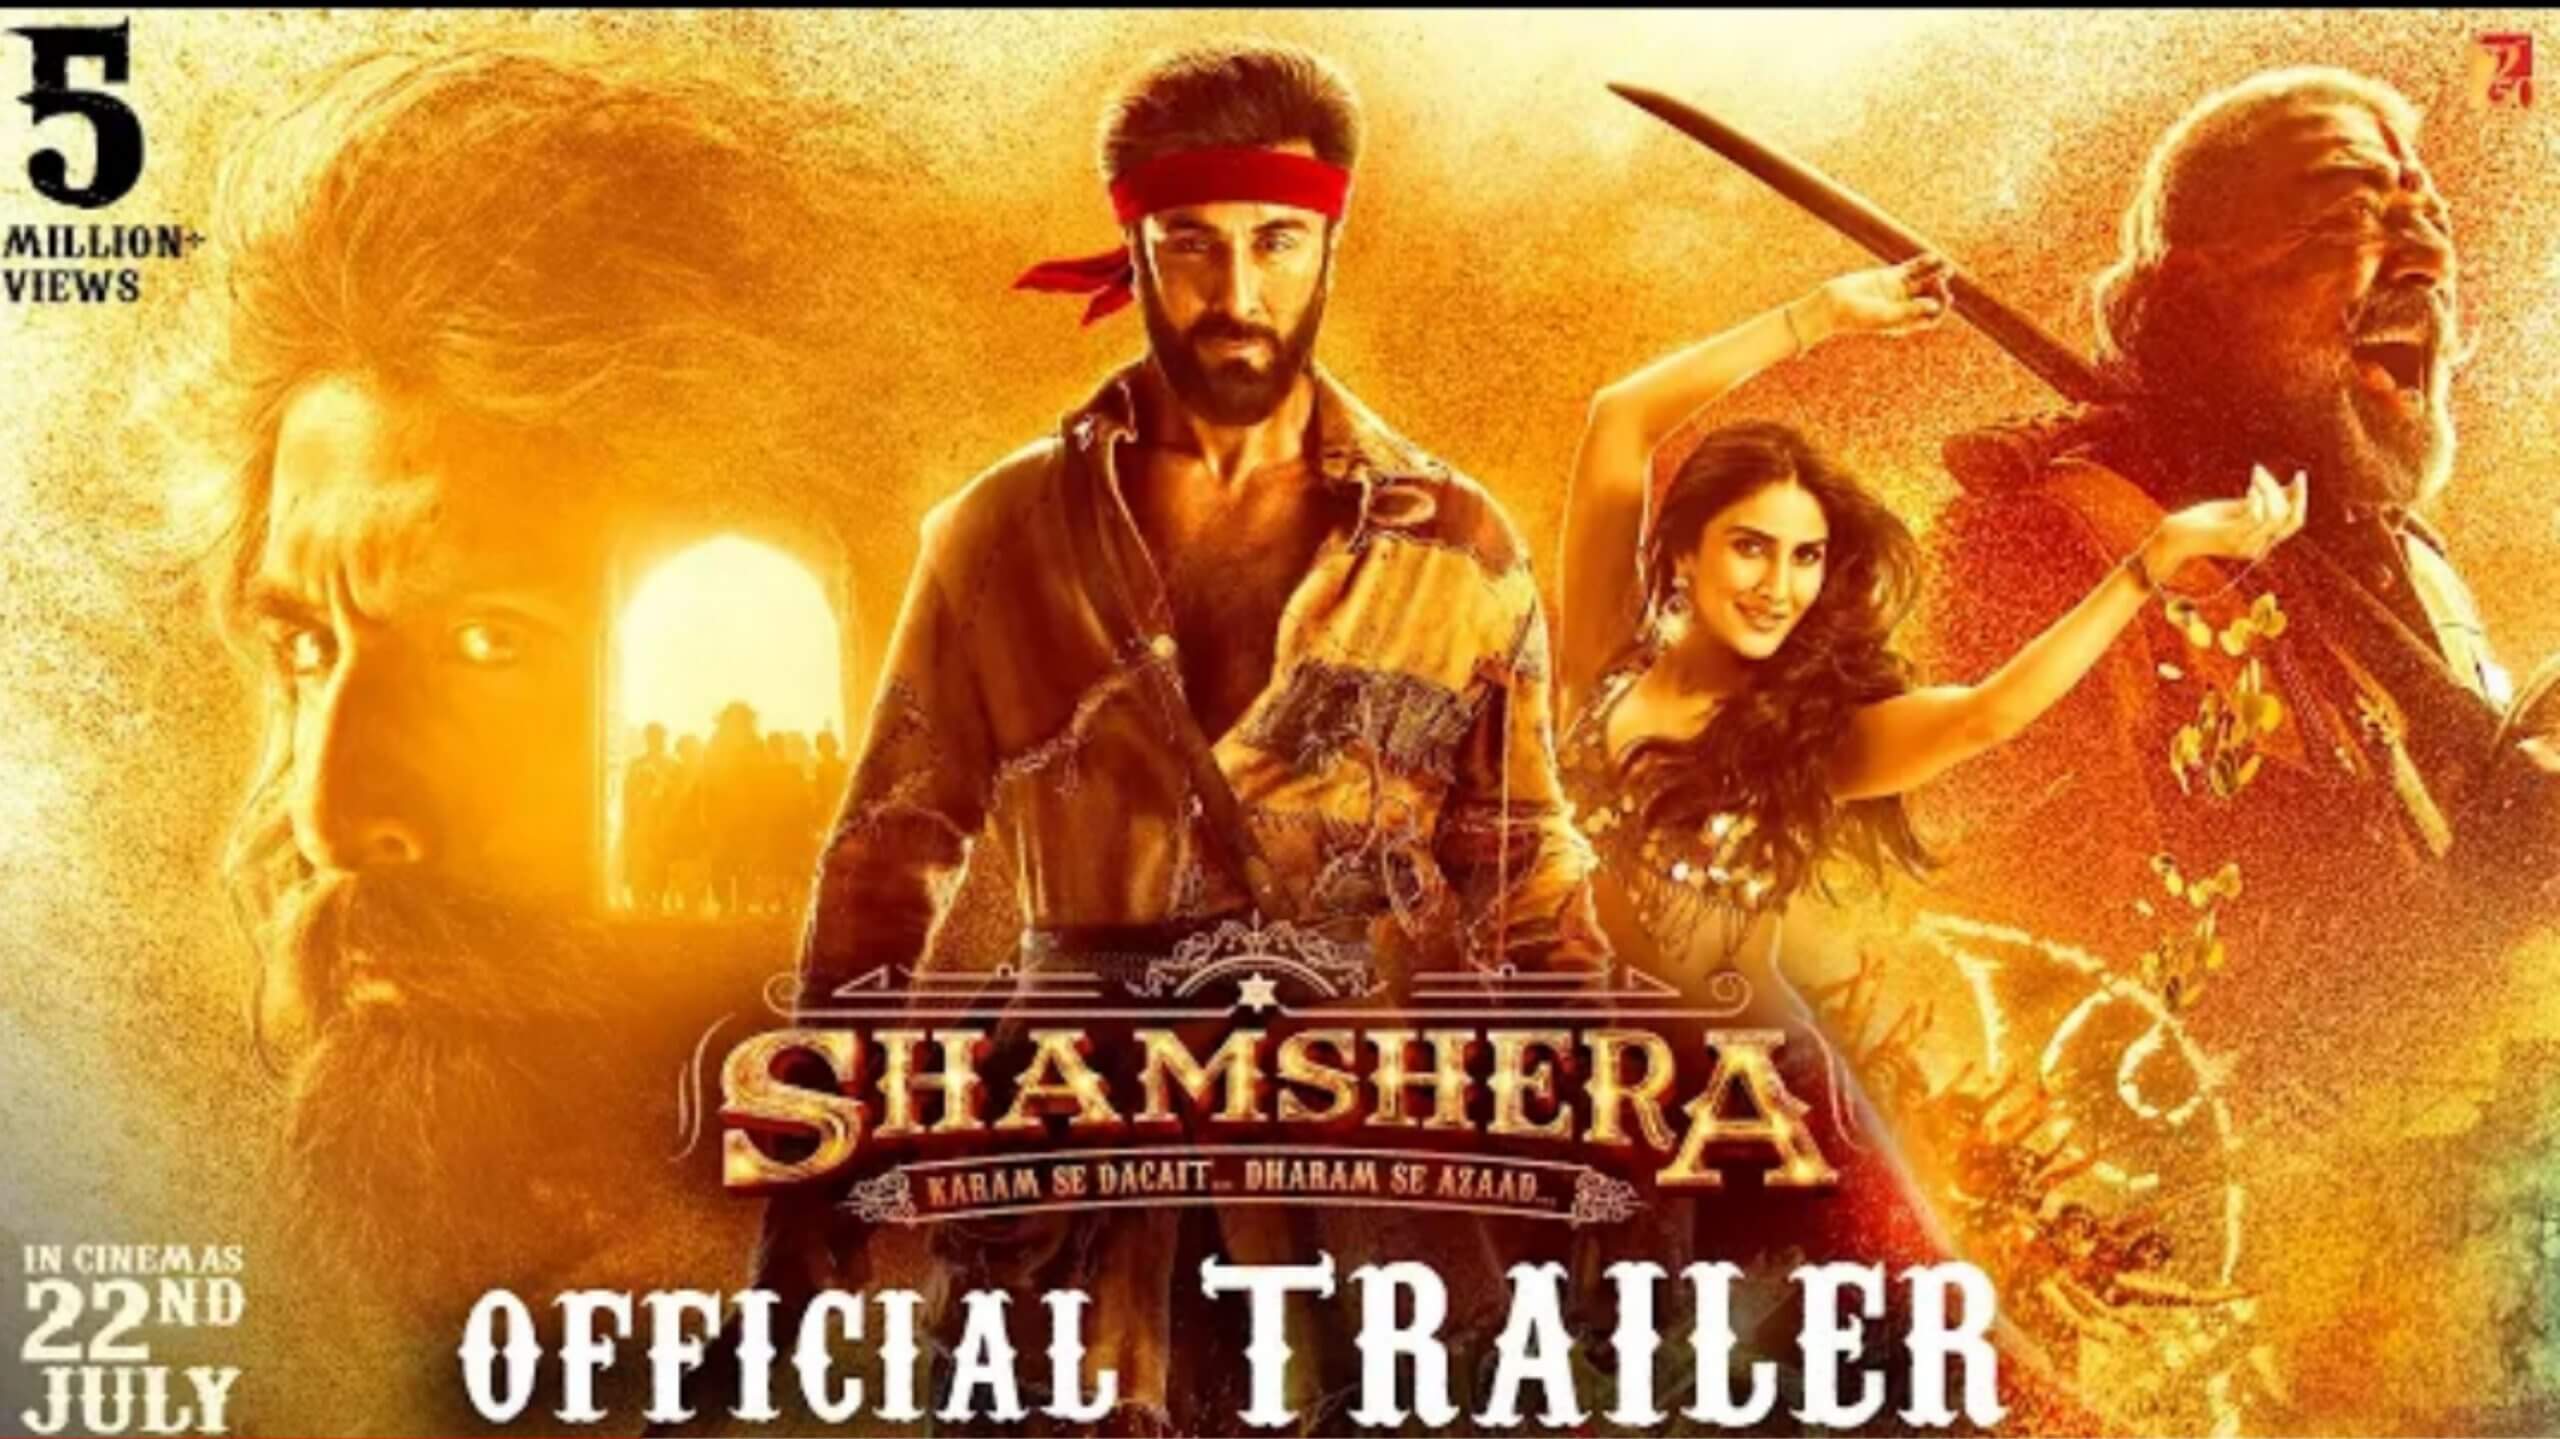 Shamshera Trailer OUT, movie to release on July 22